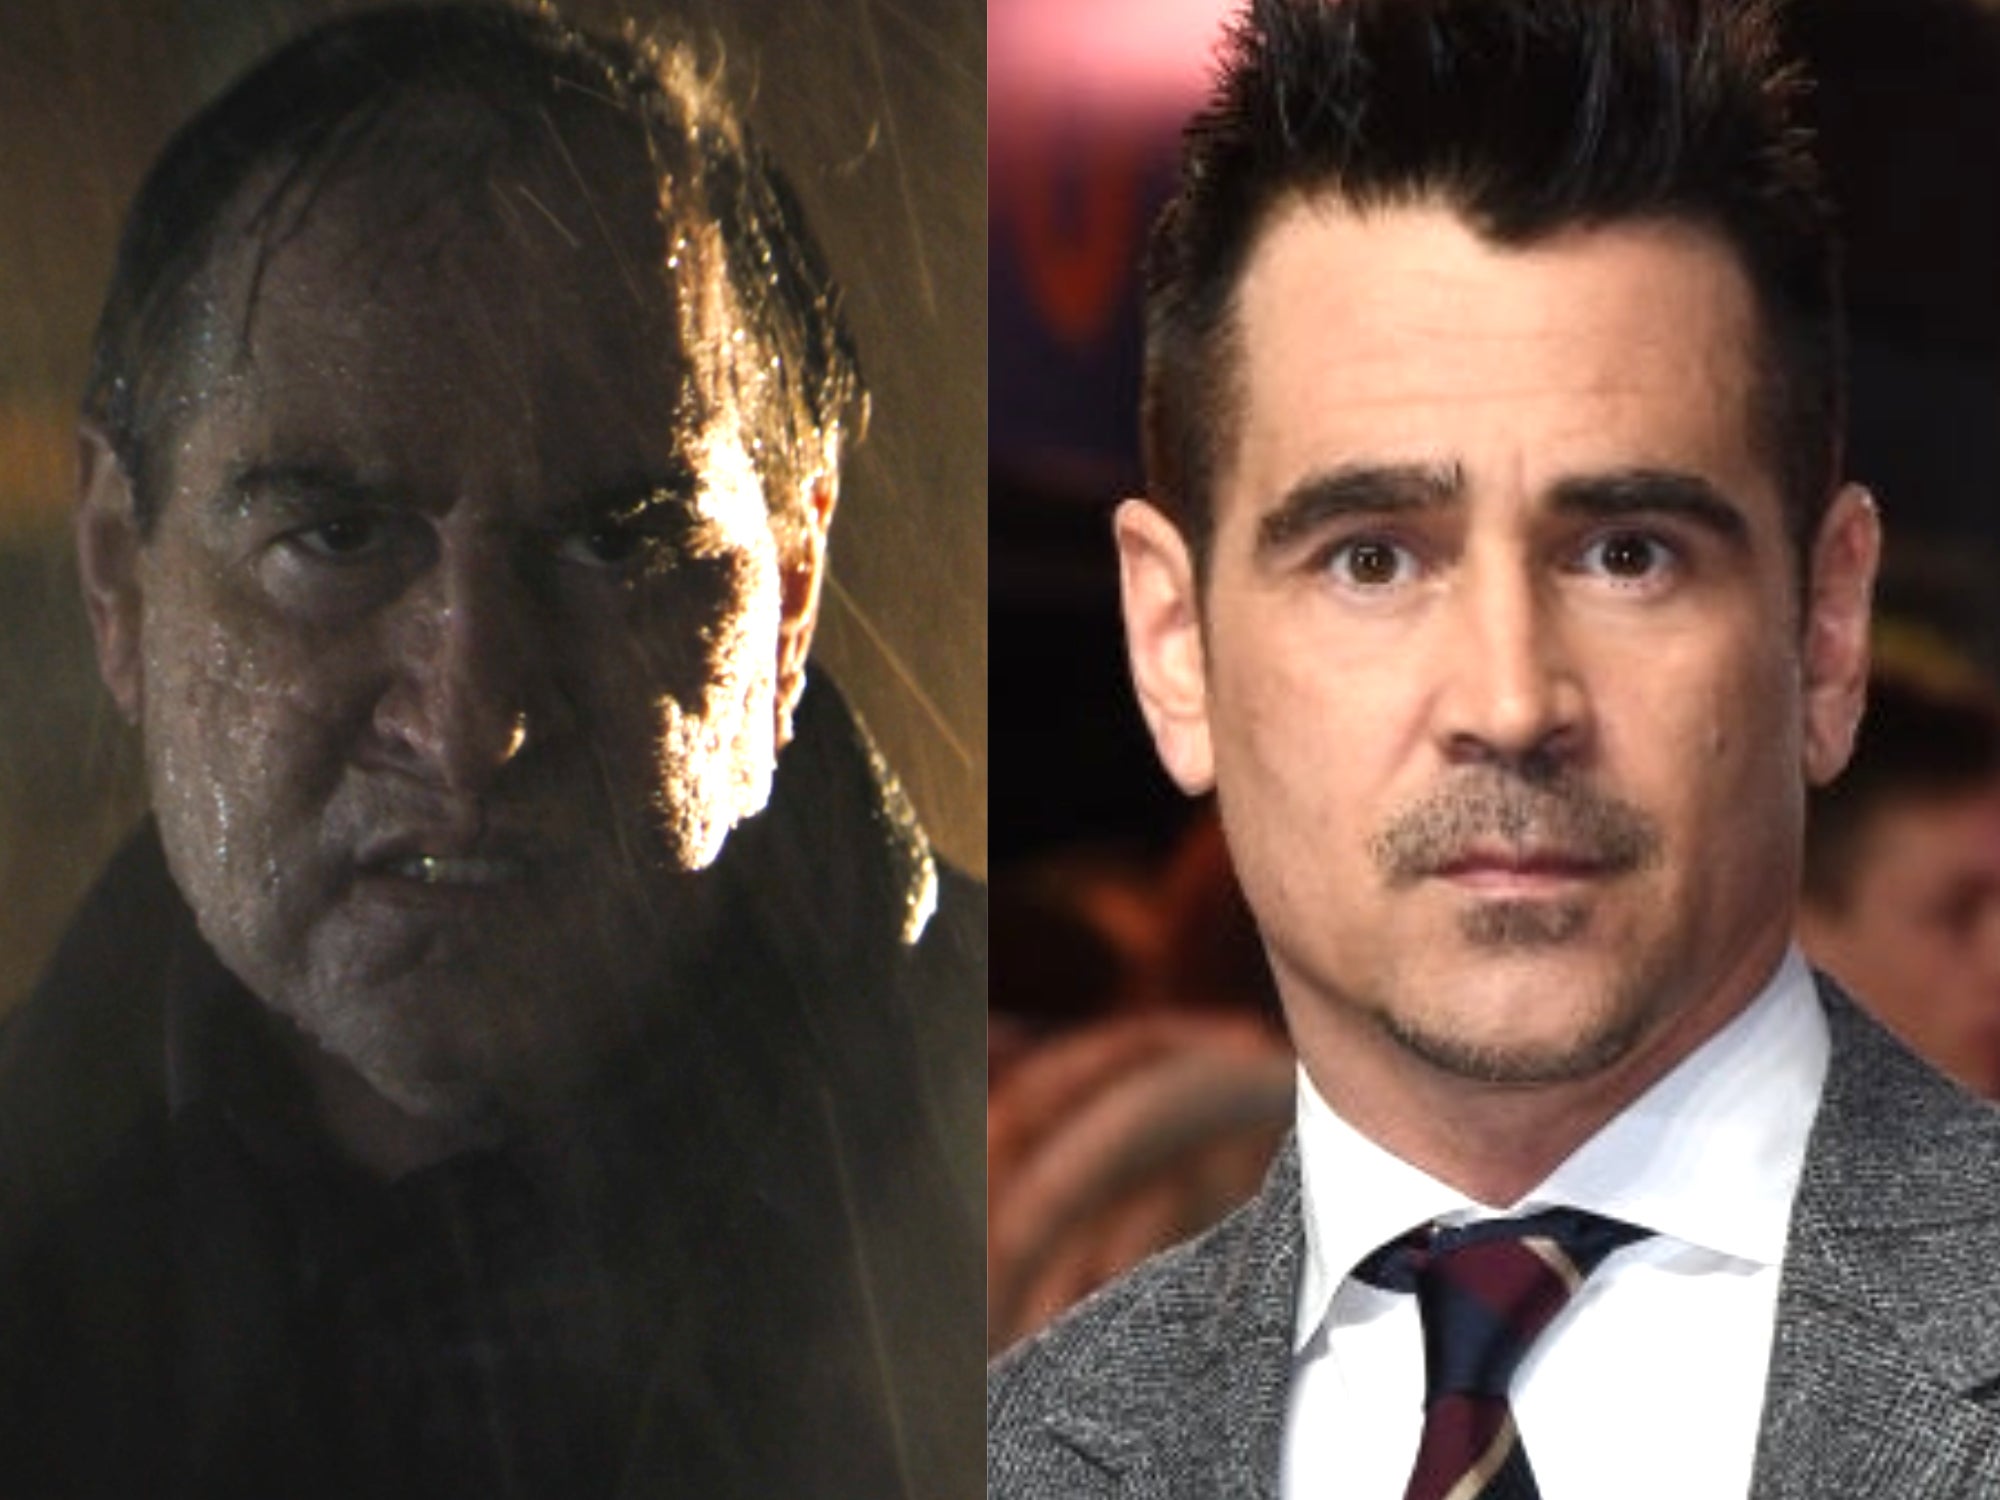 Colin Farrell was so unrecognisable as The Penguin his Batman co-stars didn't know he'd arrived on set